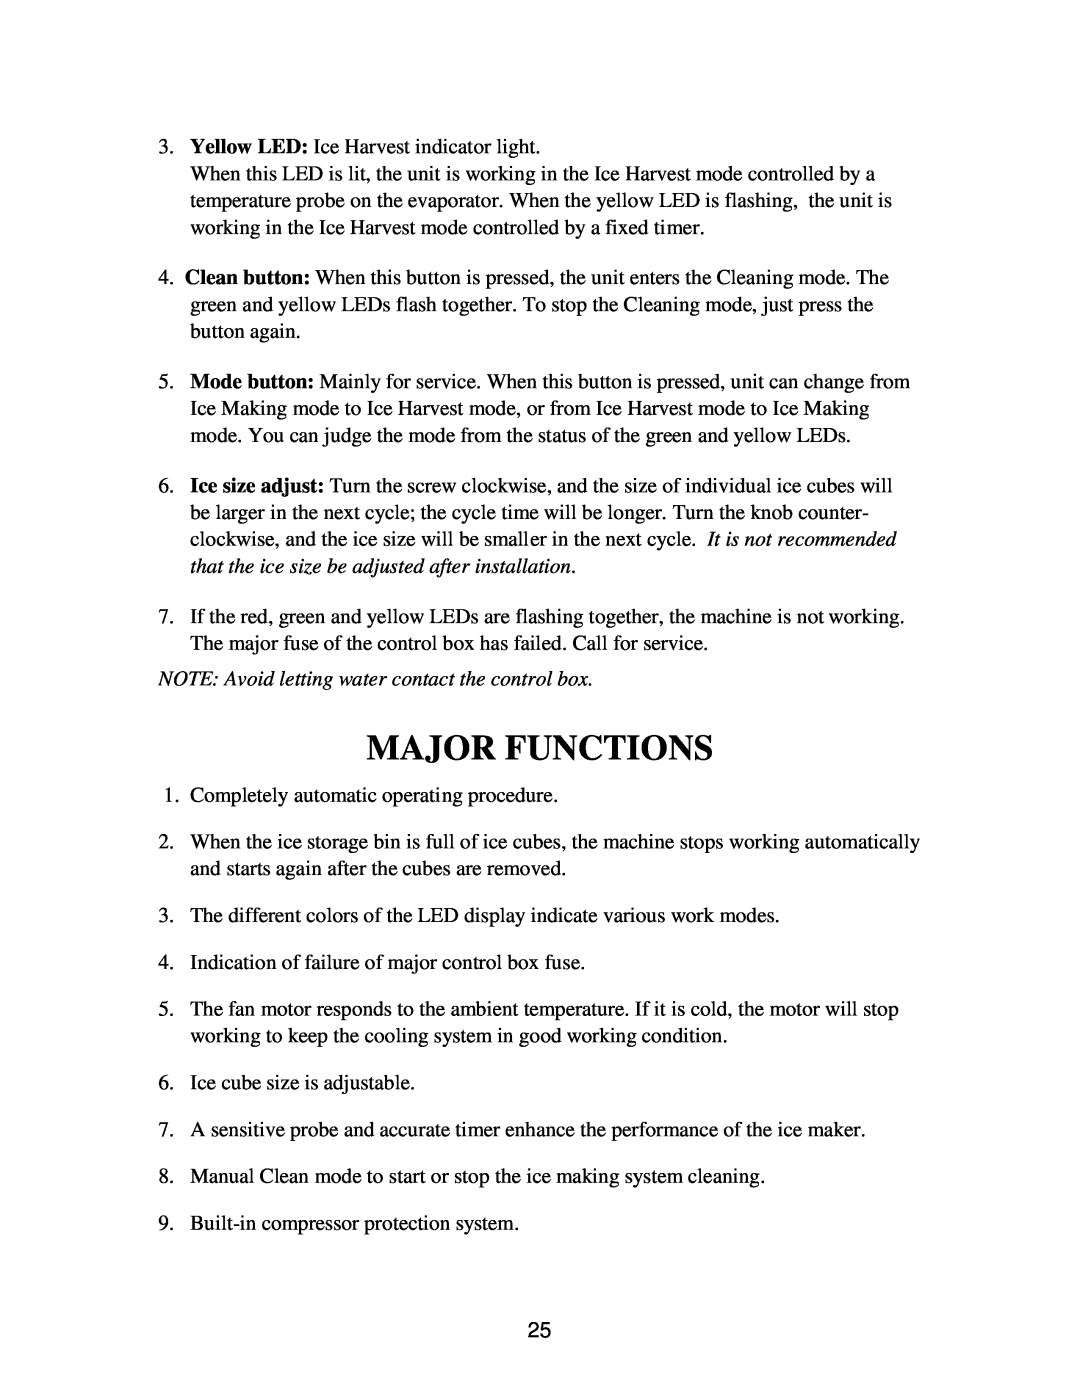 Franklin Industries, L.L.C FIM120, FIM90 user manual Major Functions, NOTE Avoid letting water contact the control box 